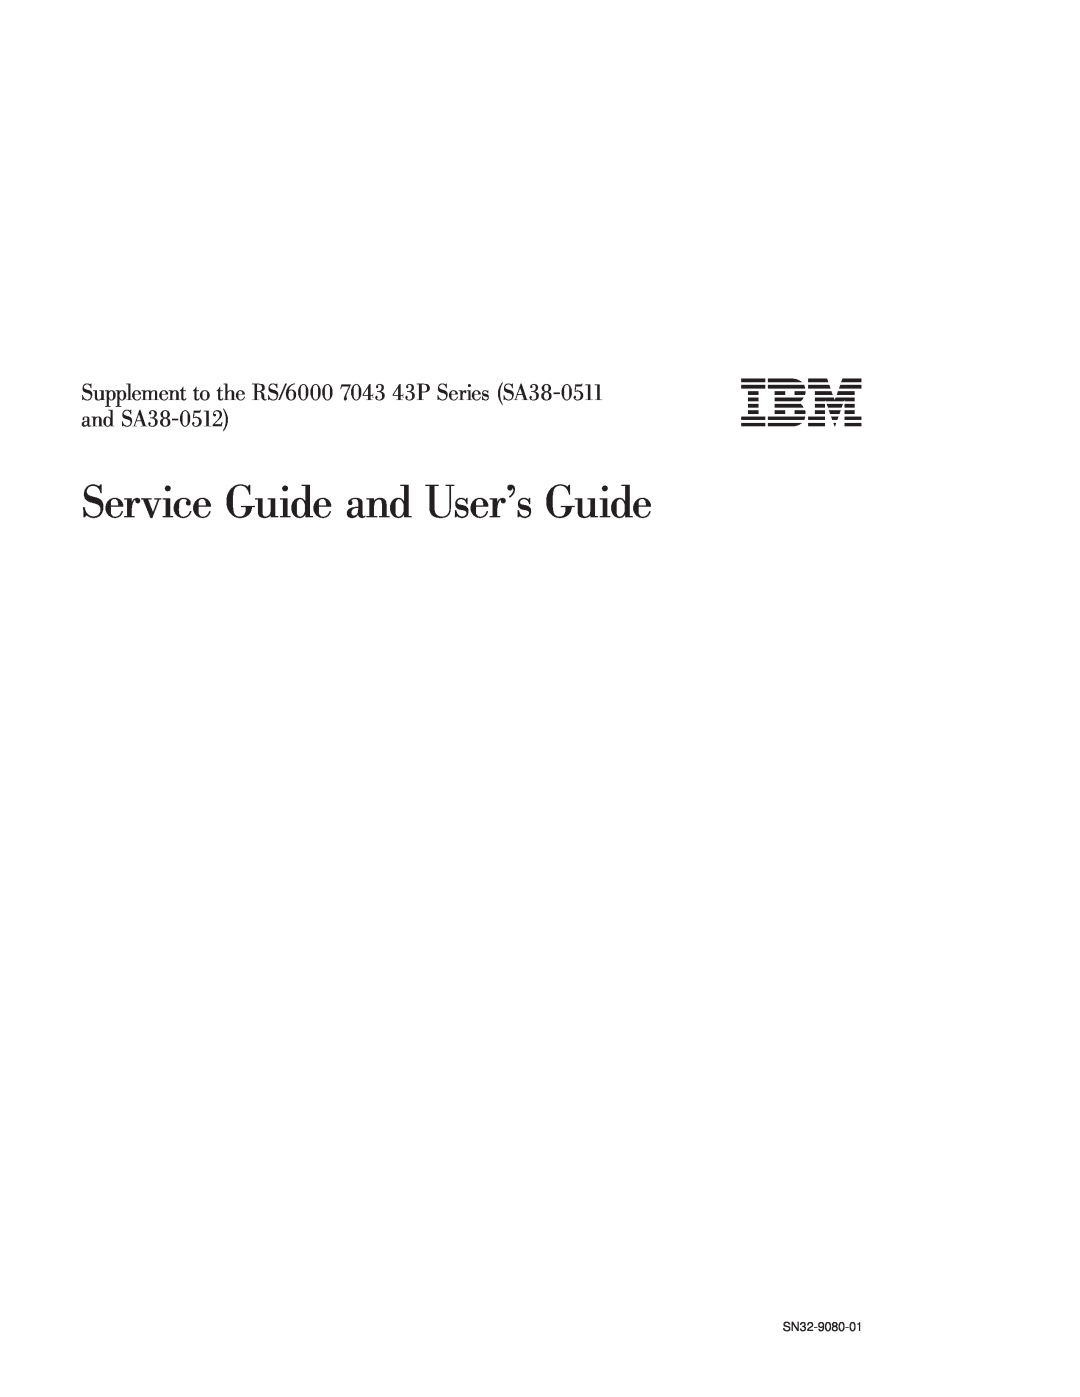 IBM SN32-9080-01 manual Service Guide and Users Guide, Supplement to the RS/6000 7043 43P Series SA38-0511, and SA38-0512 